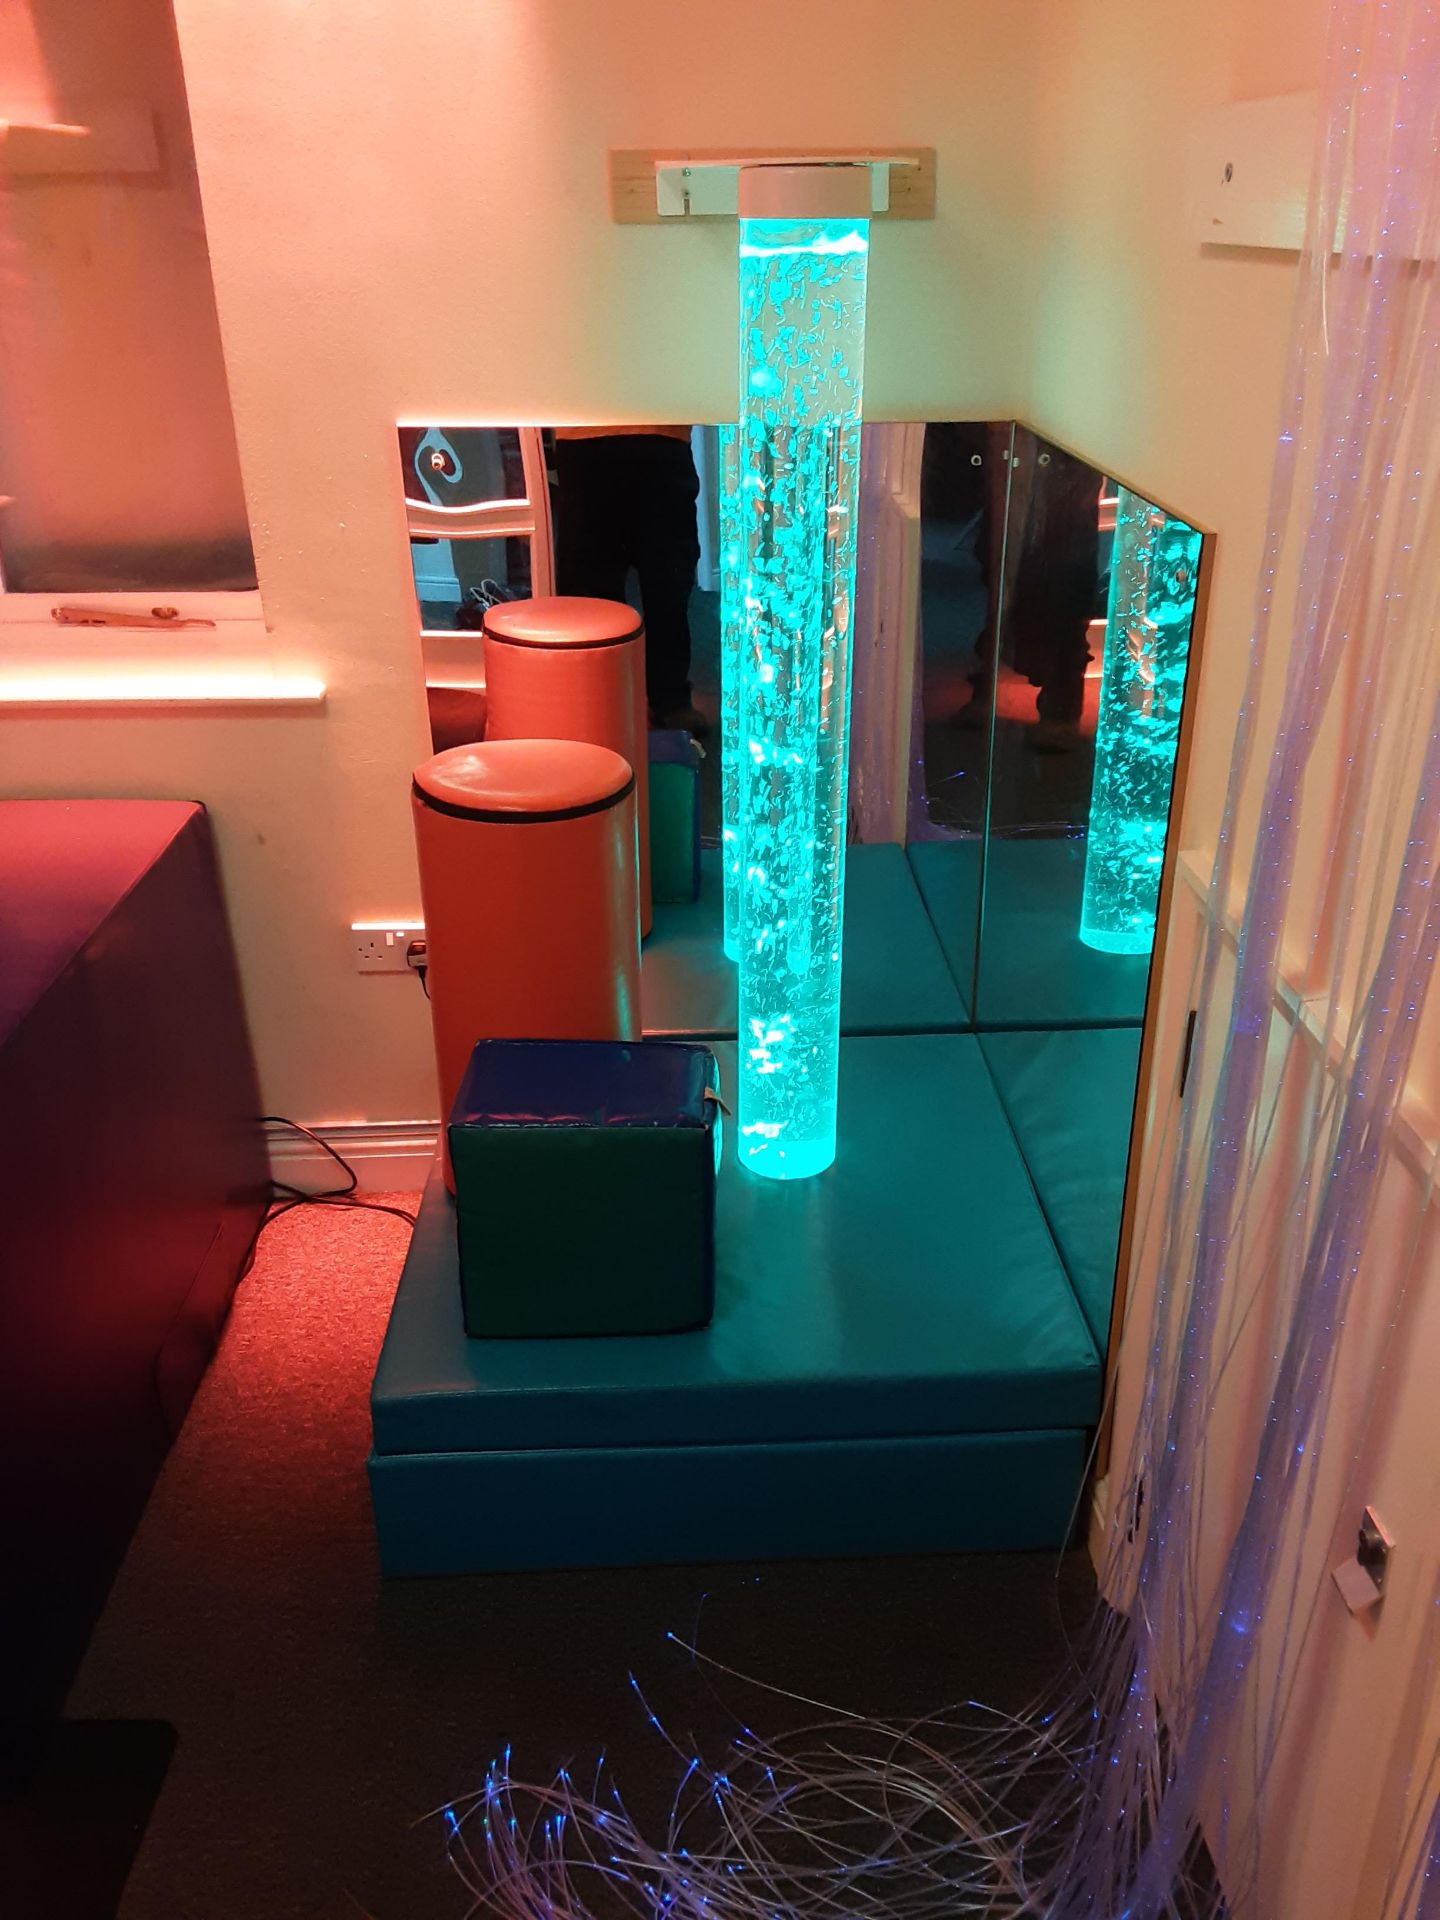 Contents of Sensory Room To Include SpaceKraft Light & Sound Therapy Station with Cushions, Lights & - Image 4 of 18